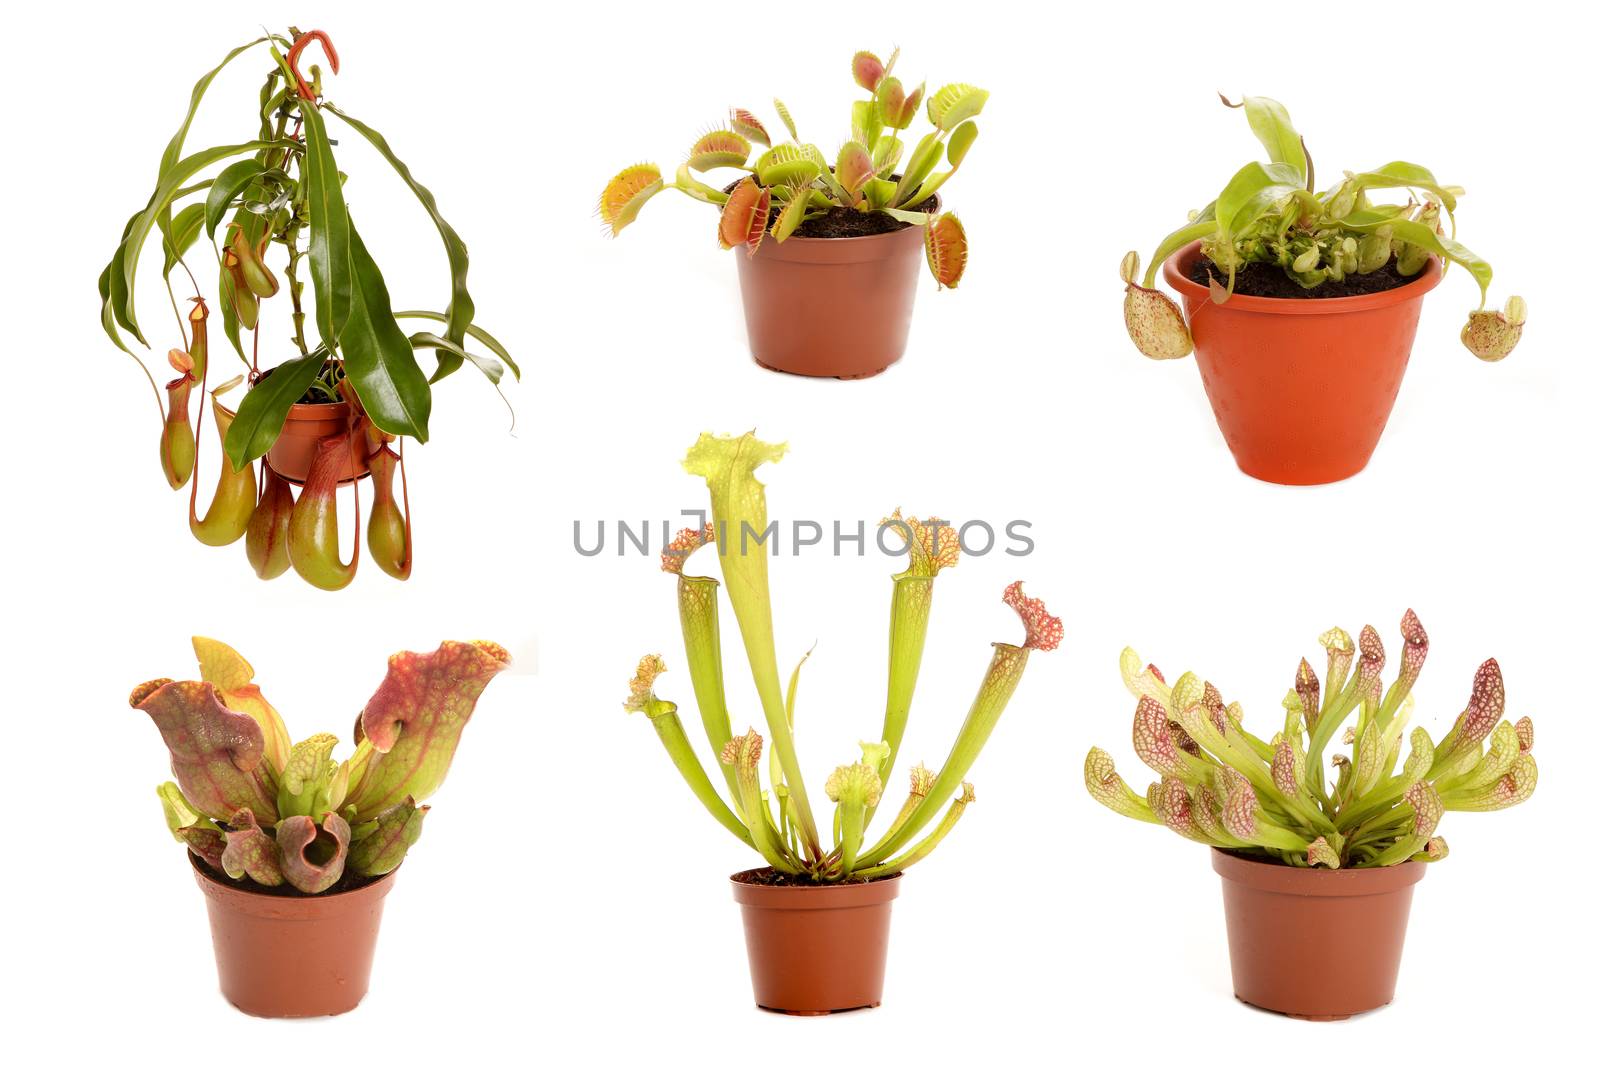 Varieties of predatory plants in flower pots on a white background